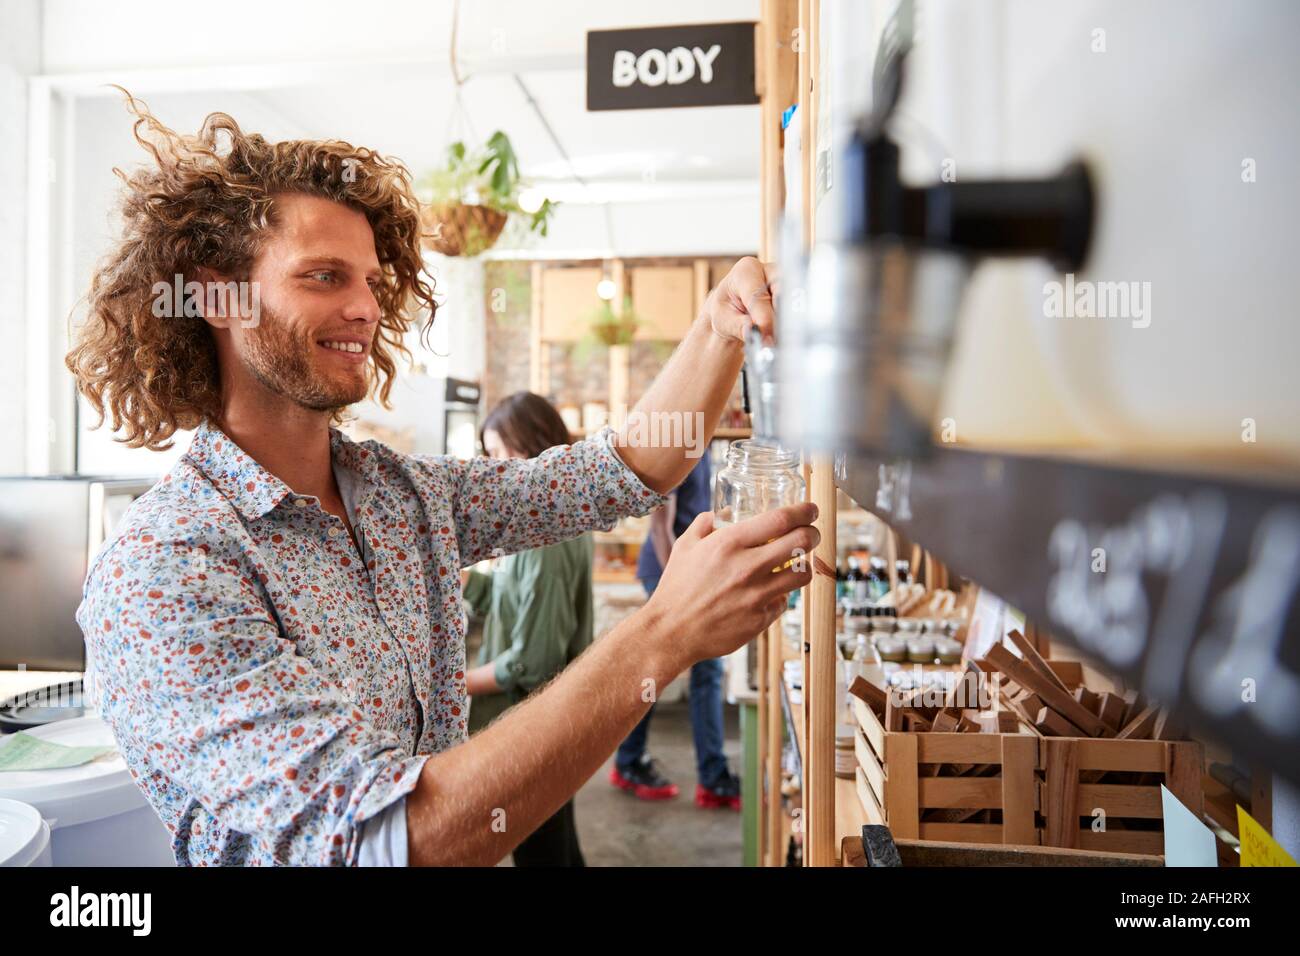 Man Filling Container With Dishwasher Powder In Plastic Free Grocery Store Stock Photo